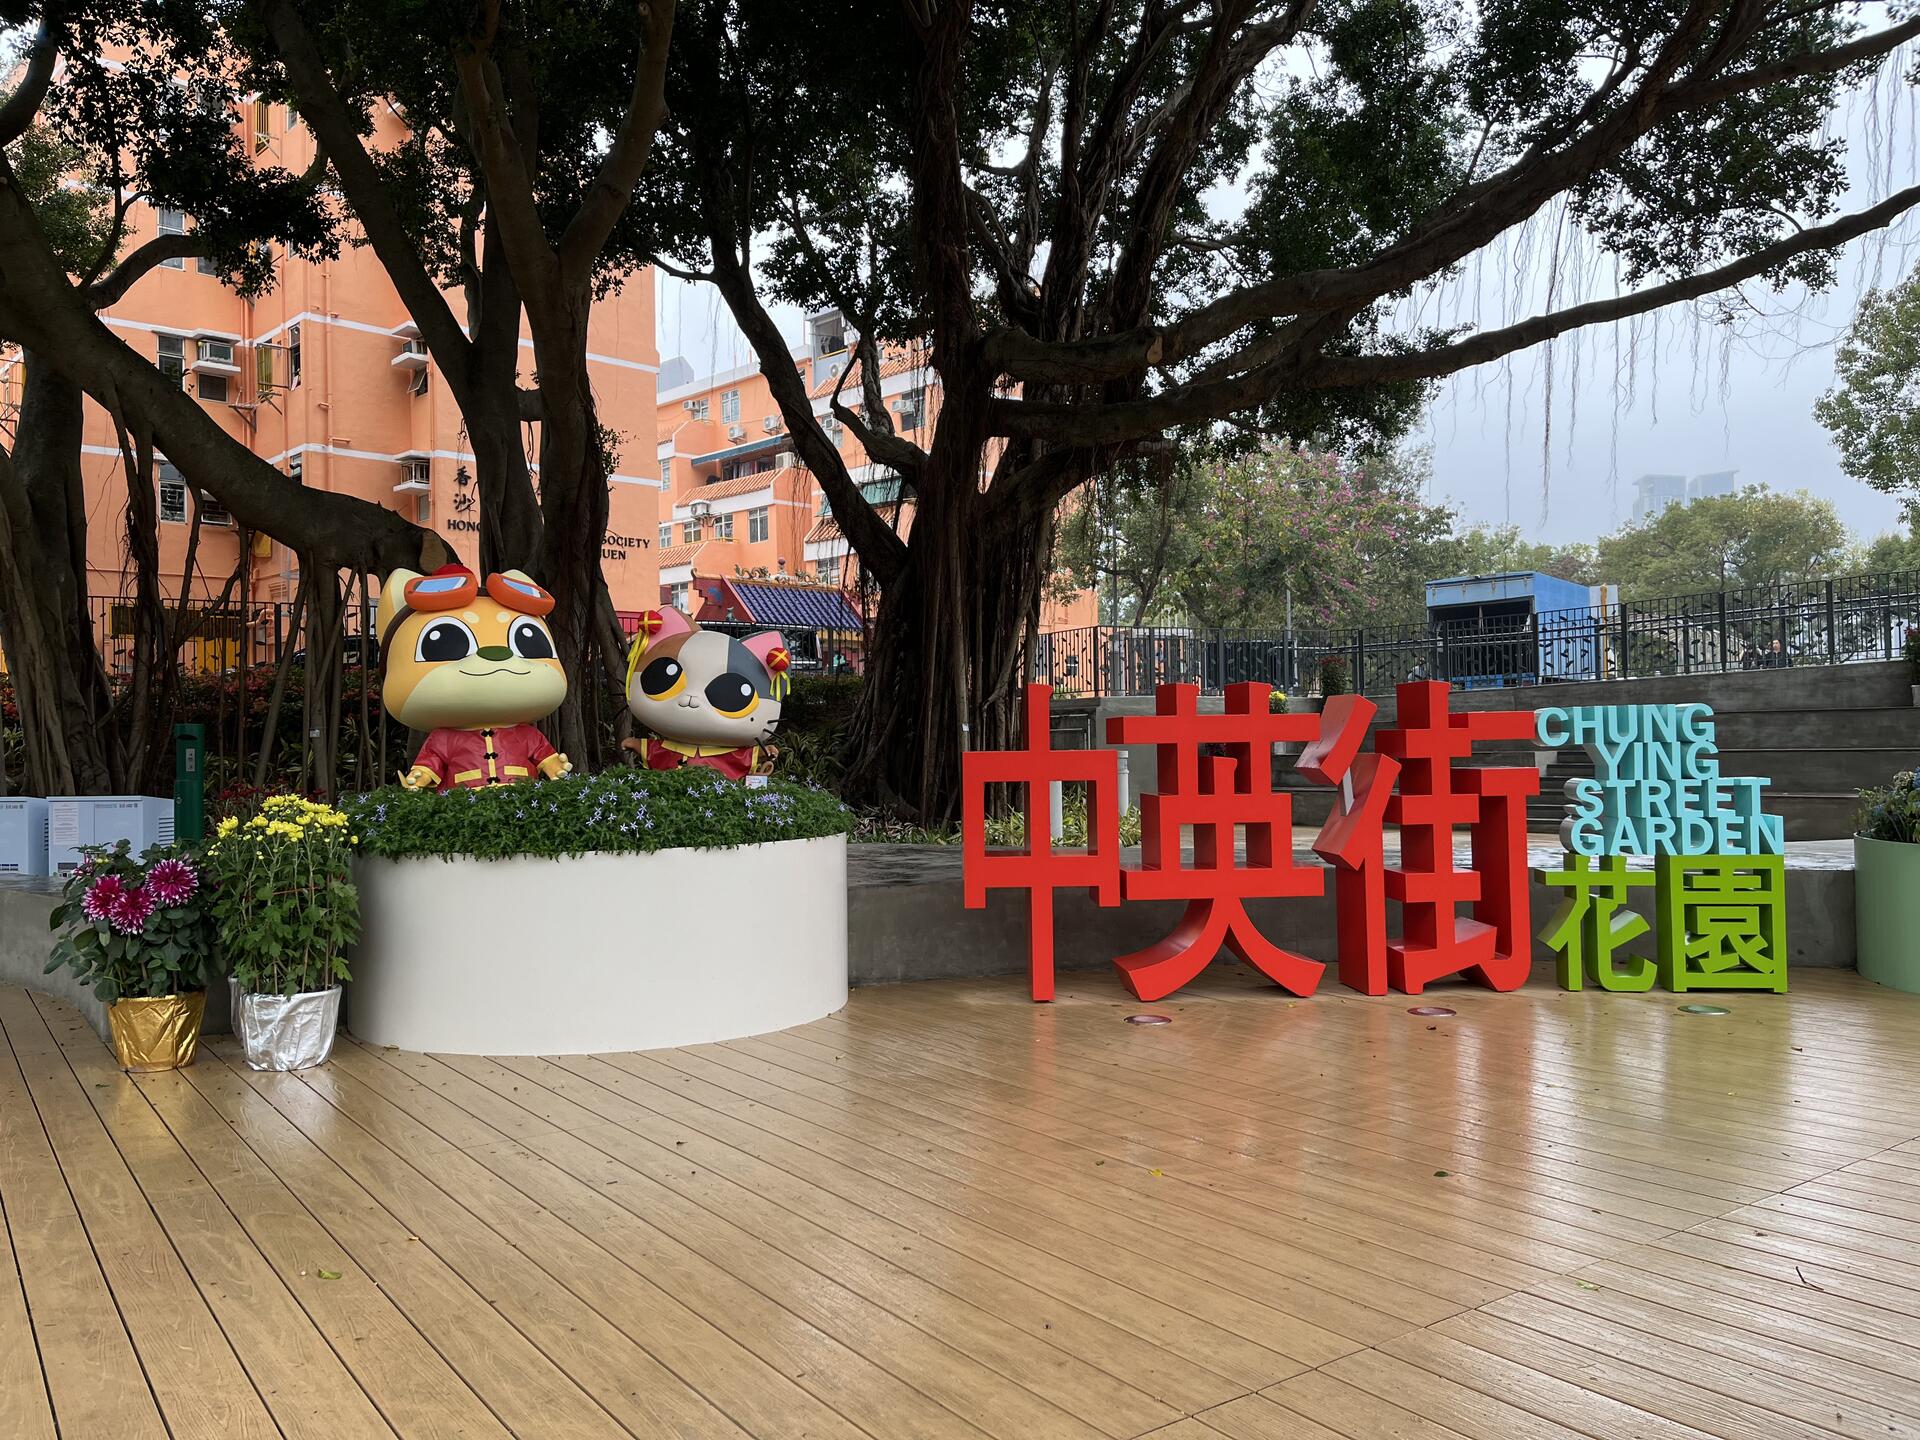 Chung Ying Street Garden (newly opened check-in attraction)